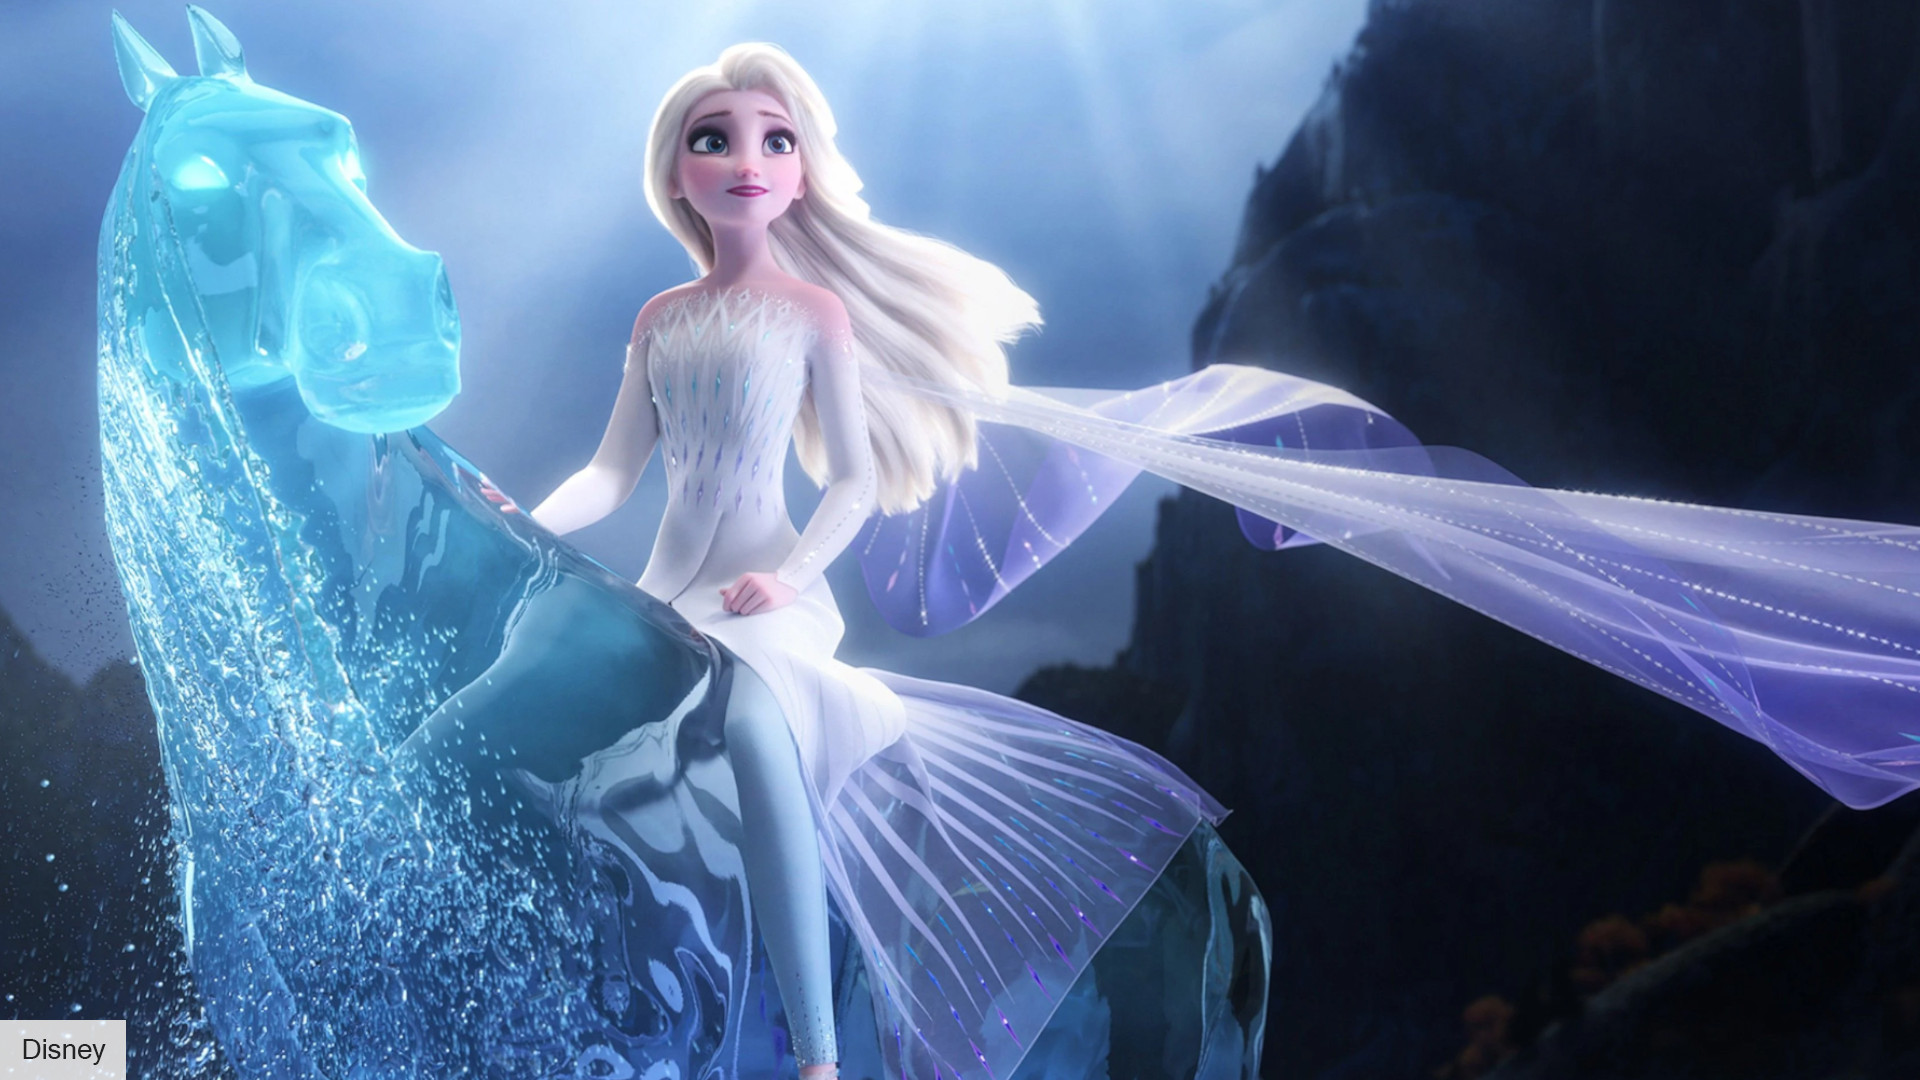 Frozen 3: Release Date, Storyline and Everything You Need To Know!